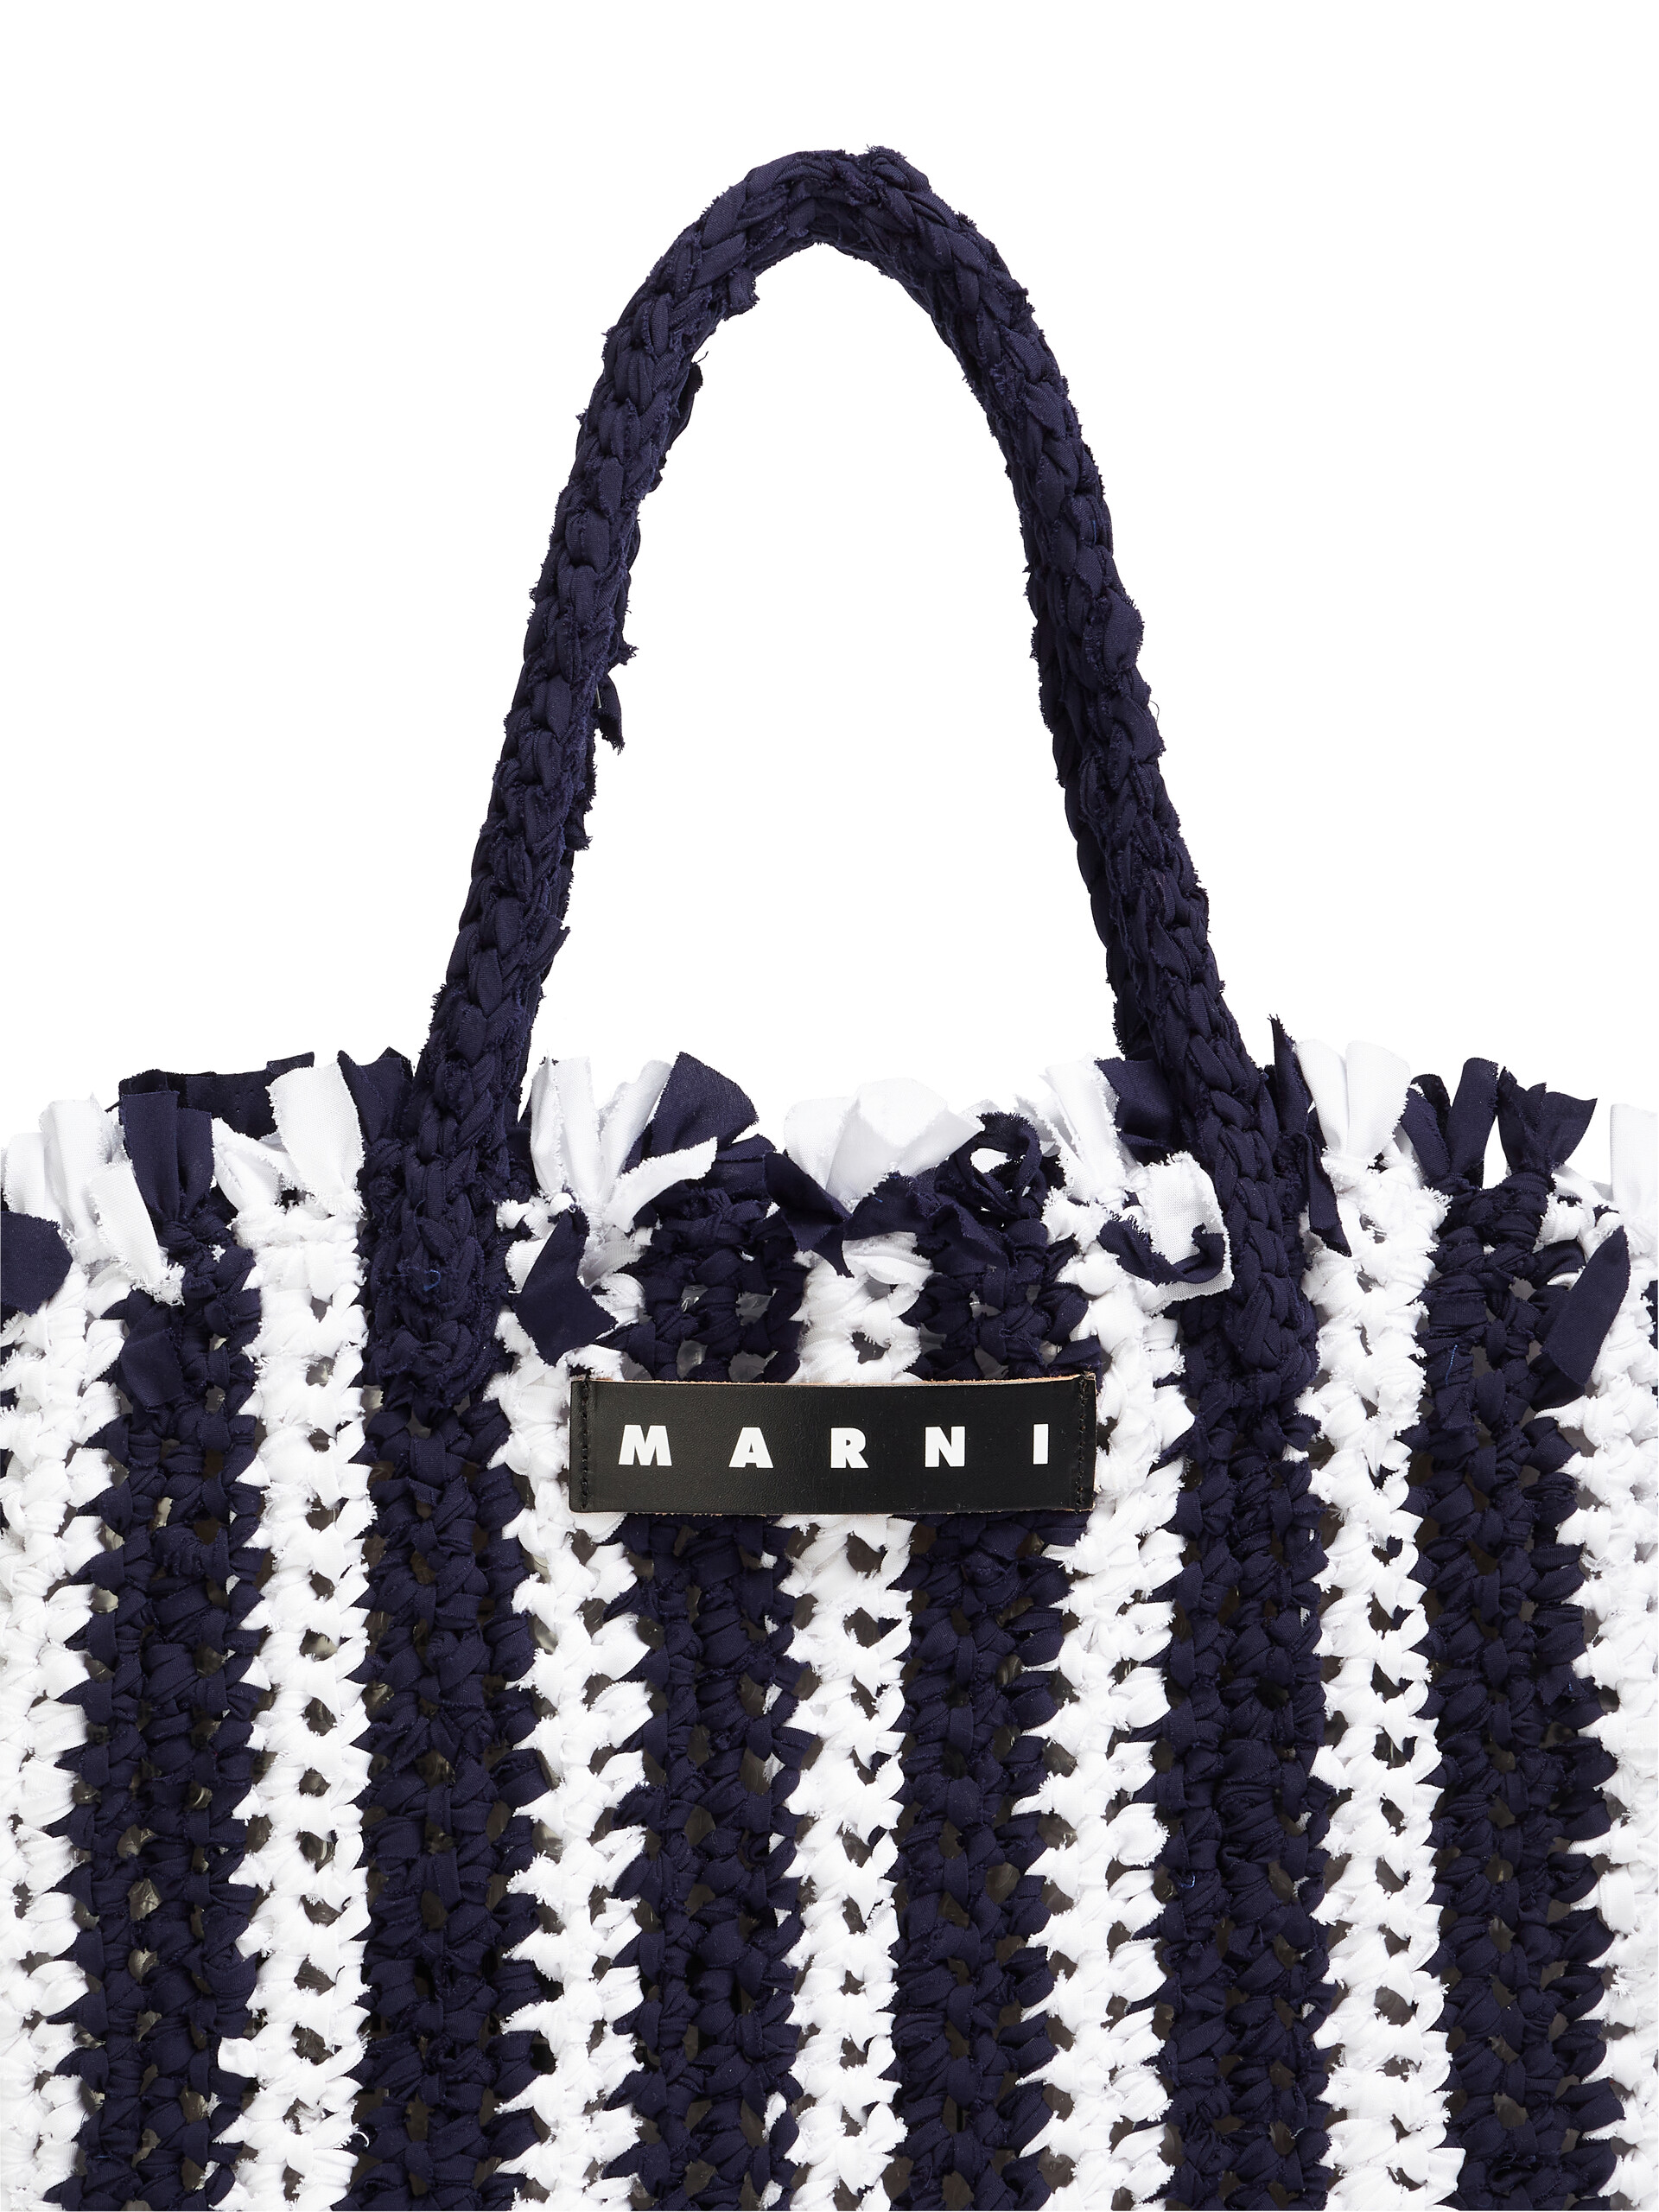 MARNI MARKET bag in white and blue cotton - Bags - Image 4